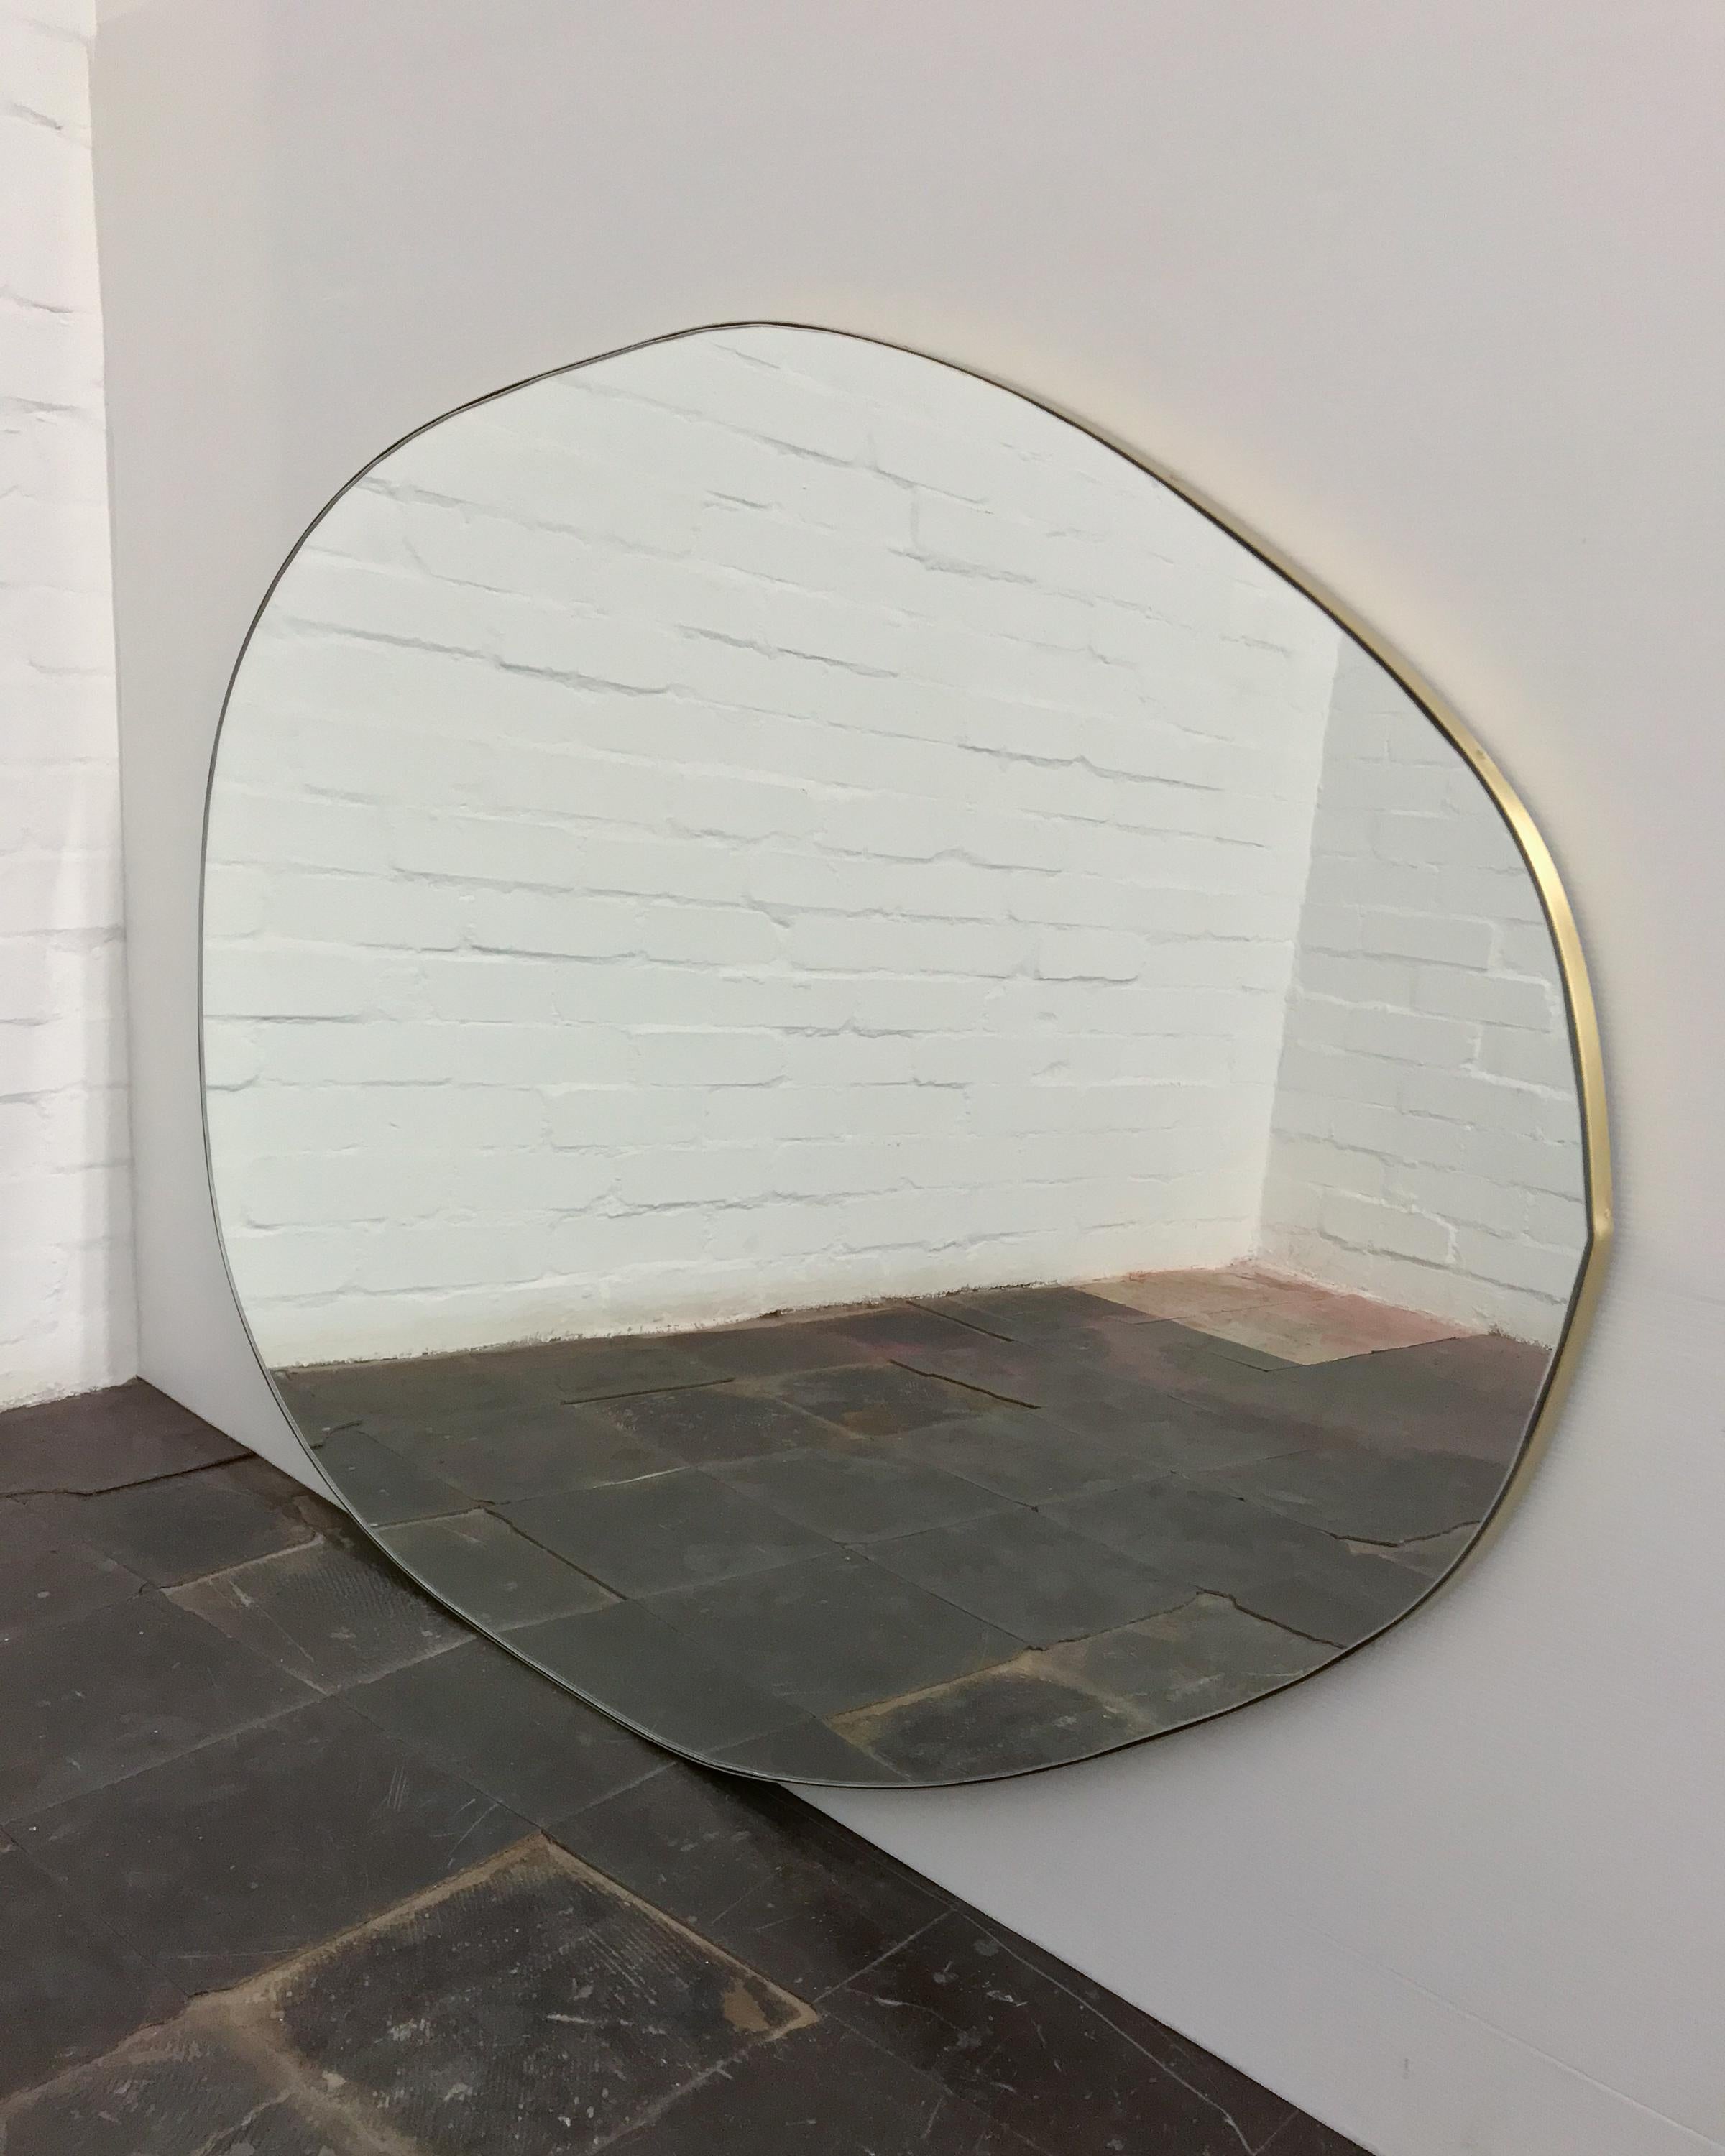 Playful and modern organic shaped mirror with a solid brass brushed frame.

Fitted with an aluminium z-bar. Also available on demand with a split batten system to hang completely flush with the wall.

Dimensions: 125cm x 90cm x 2.4cm / 49.2